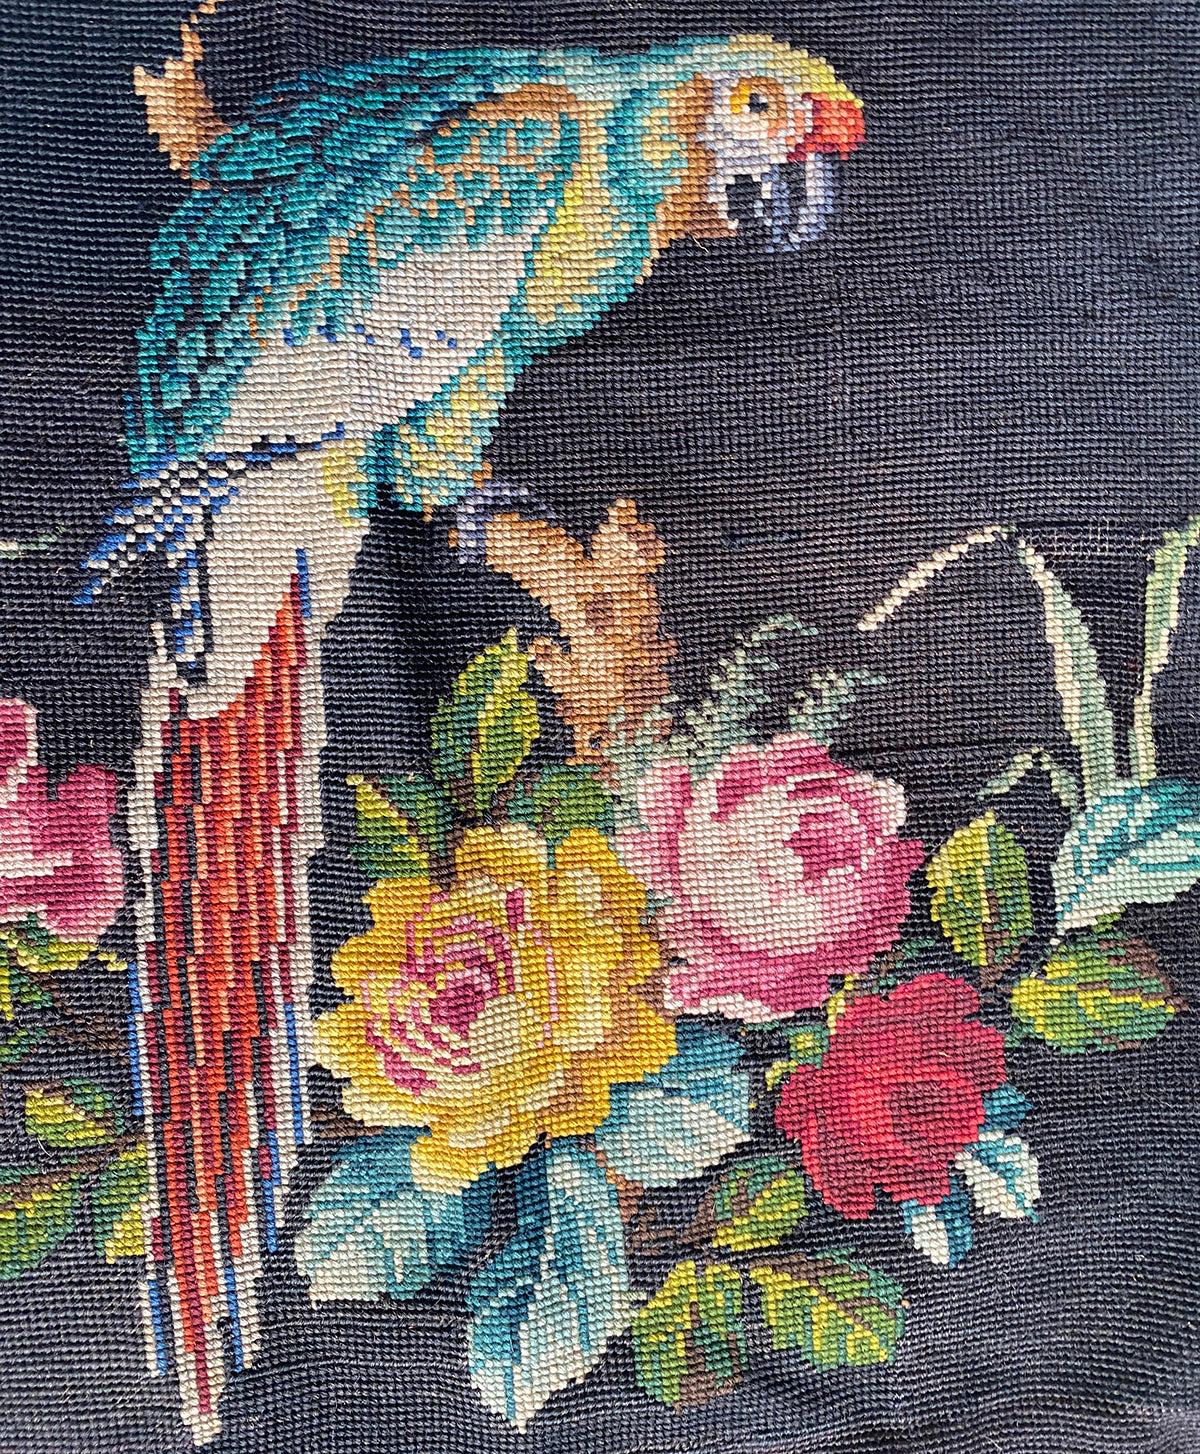 Big Antique Victorian to Edwardian Era Needlepoint Panel with Parrot and Flower Garland